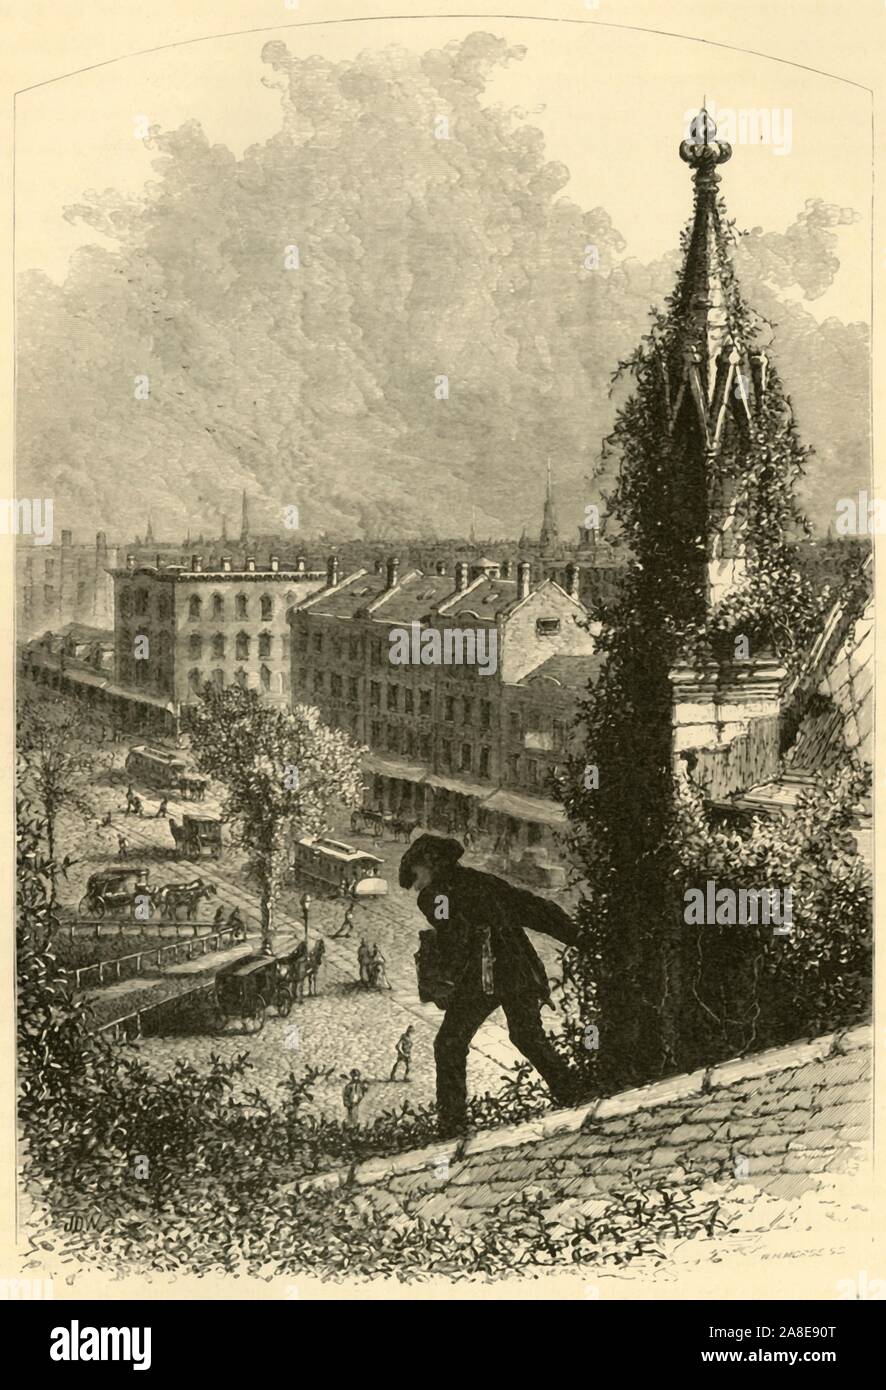 'Main Street, Buffalo, from St. Paul's Church', 1872. An artist on the roof of a church in Buffalo, New York State, USA. From &quot;Picturesque America; or, The Land We Live In, A Delineation by Pen and Pencil of the Mountains, Rivers, Lakes...with Illustrations on Steel and Wood by Eminent American Artists&quot; Vol. I, edited by William Cullen Bryant. [D. Appleton and Company, New York, 1872] Stock Photo